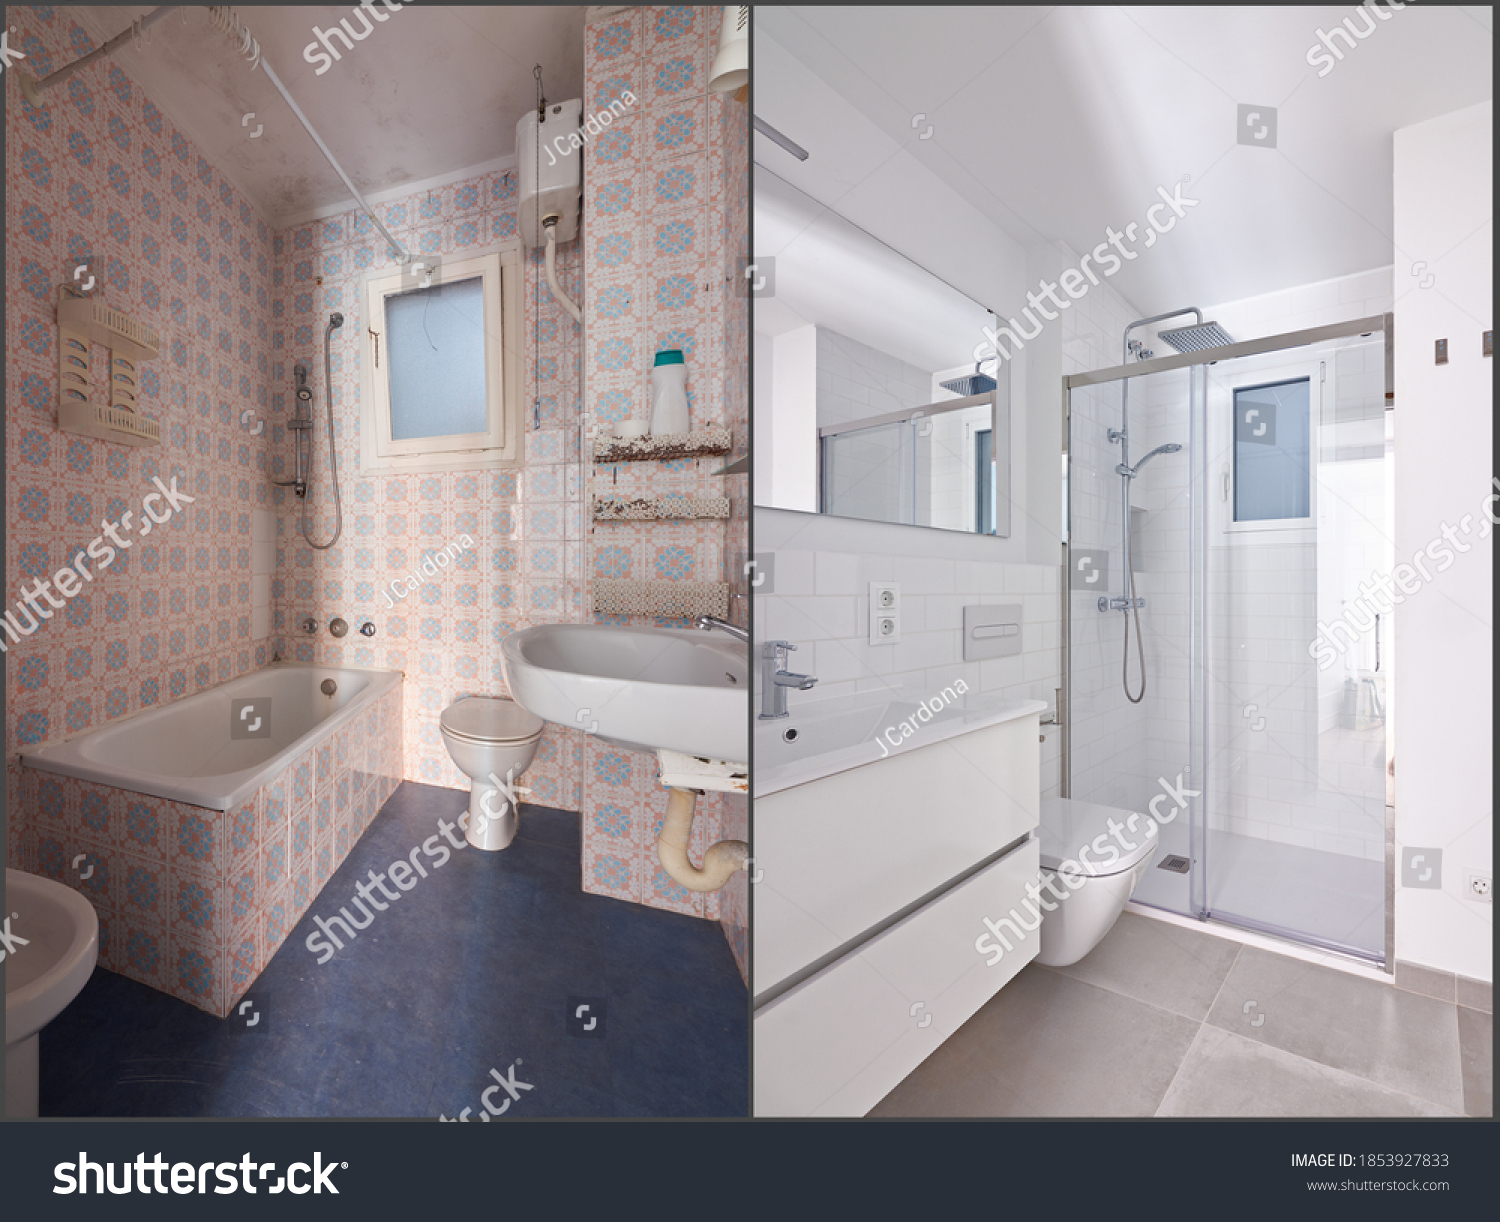 stock-photo--before-and-after-bathroom-renovation-in-barcelona-1853927833